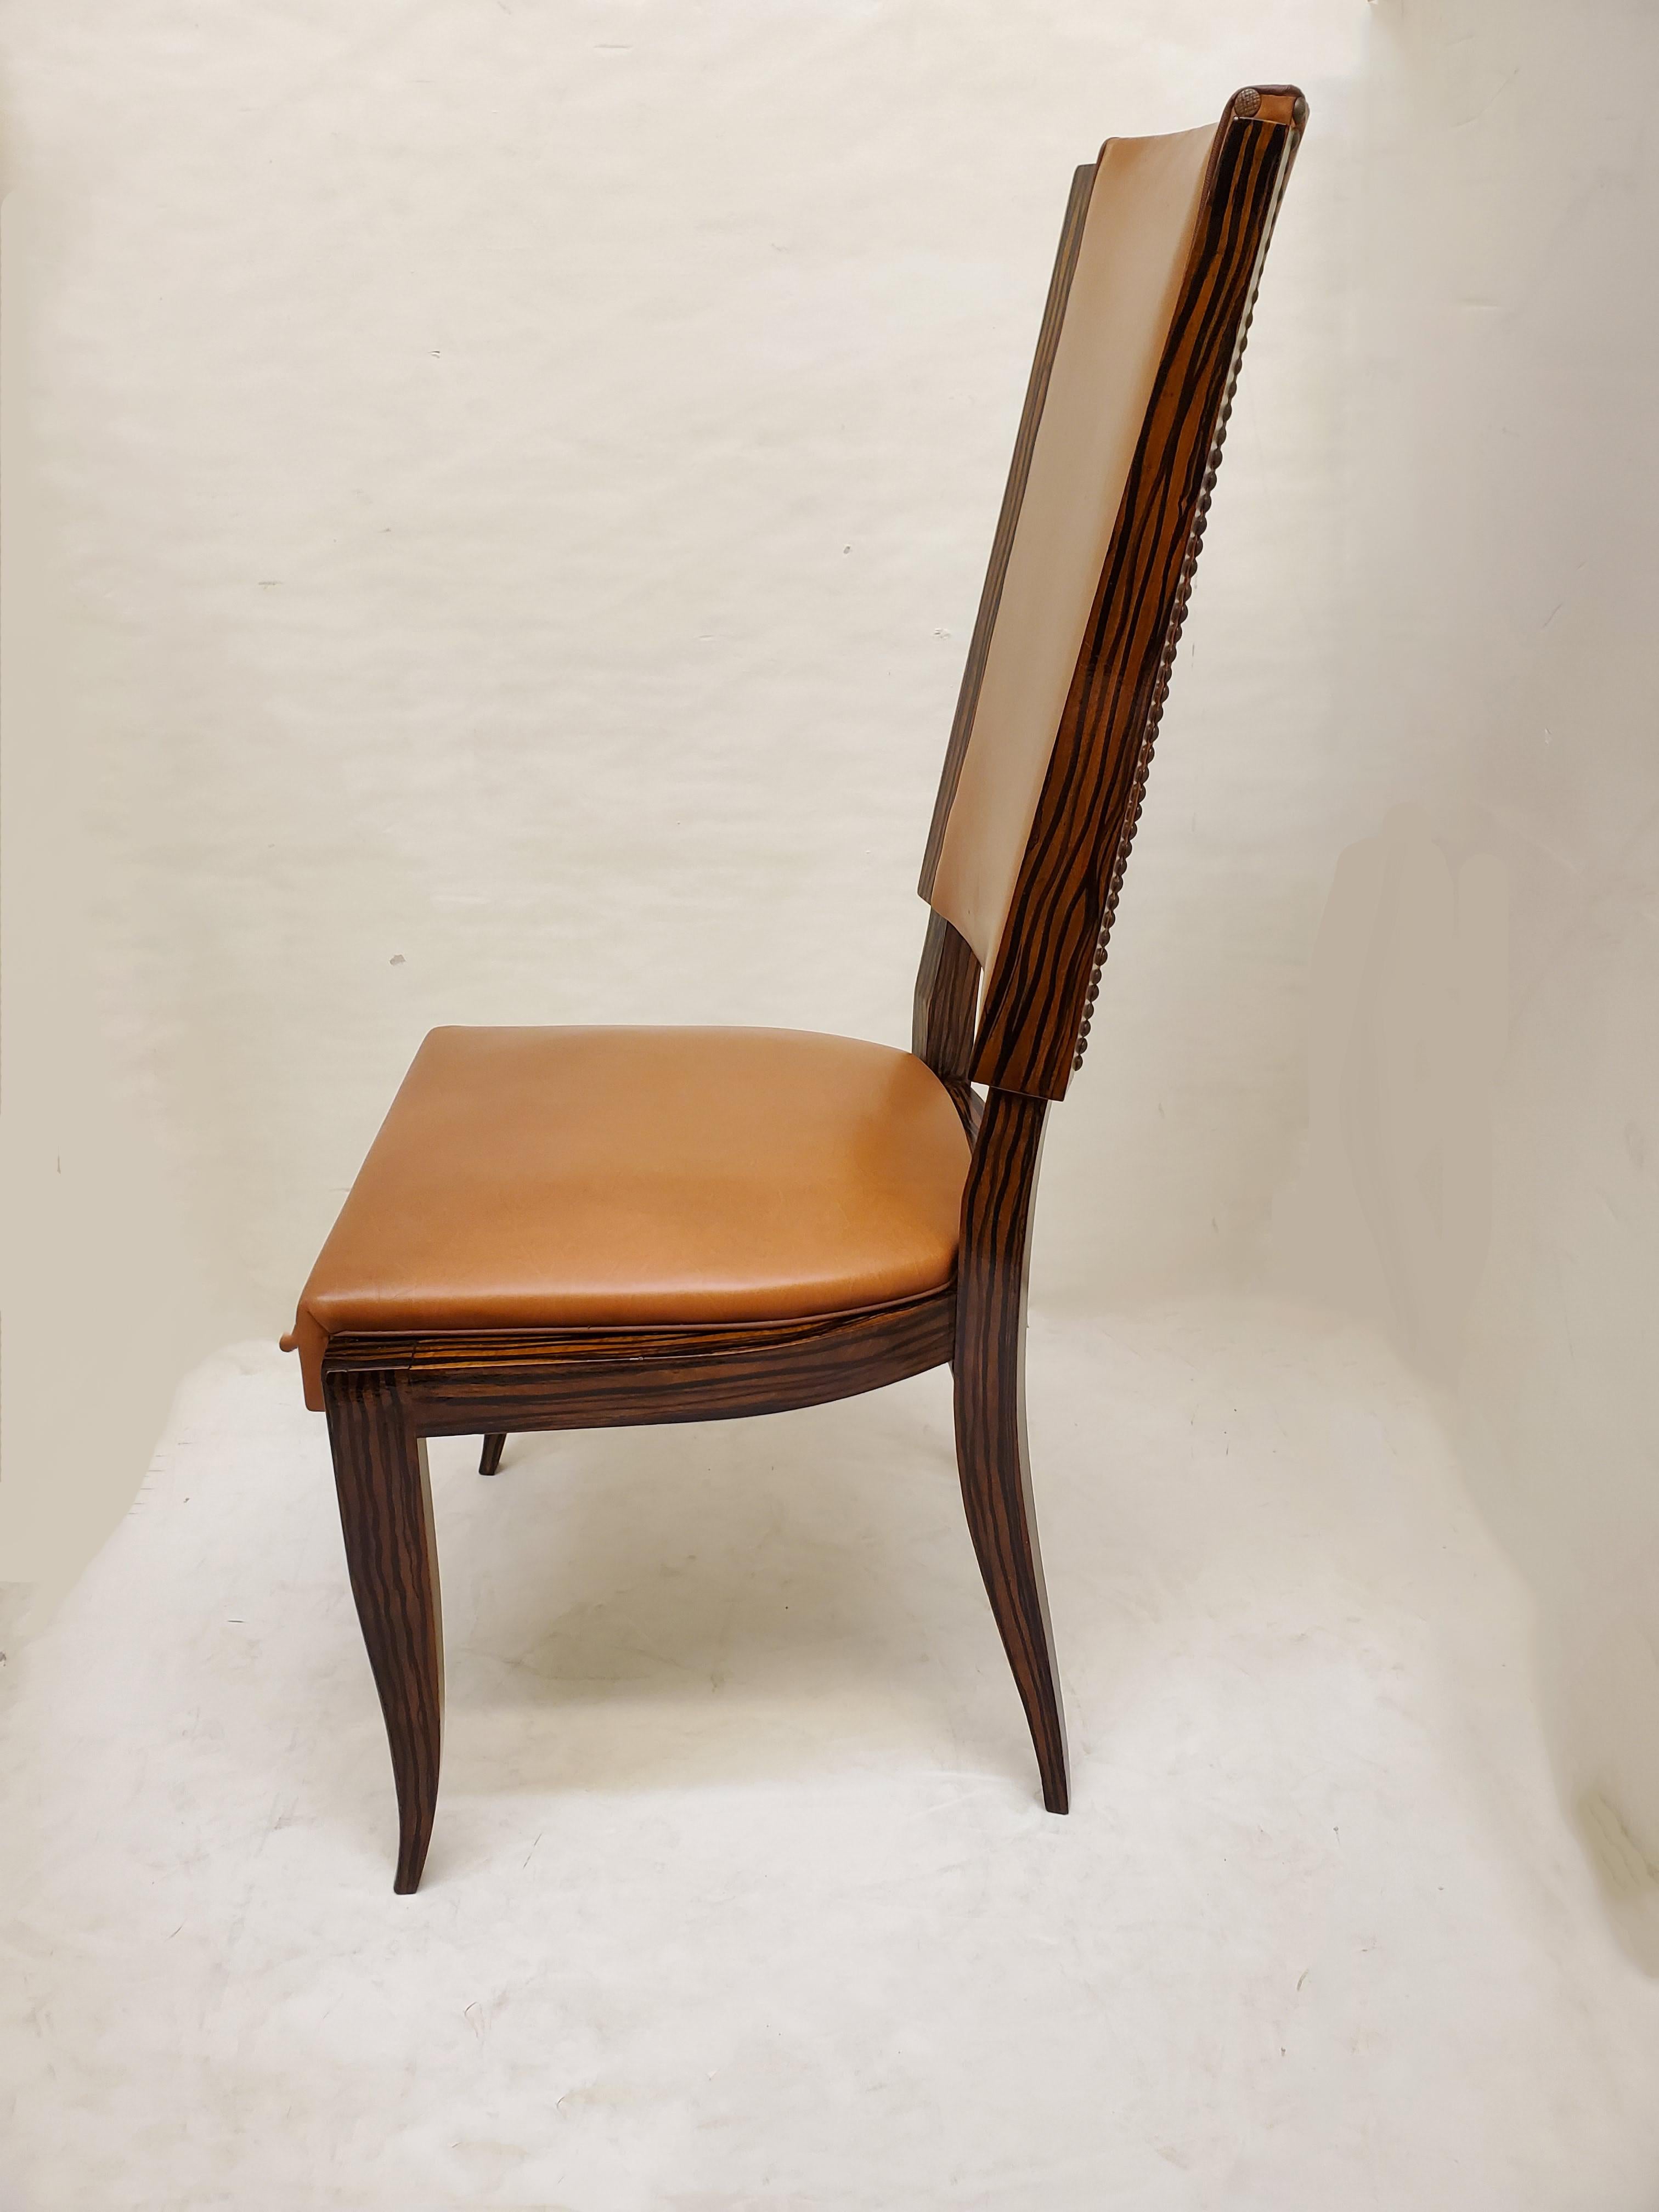 Set of Six Original French Art Deco Faux Macassar Ebony Wood Dining Chairs For Sale 4